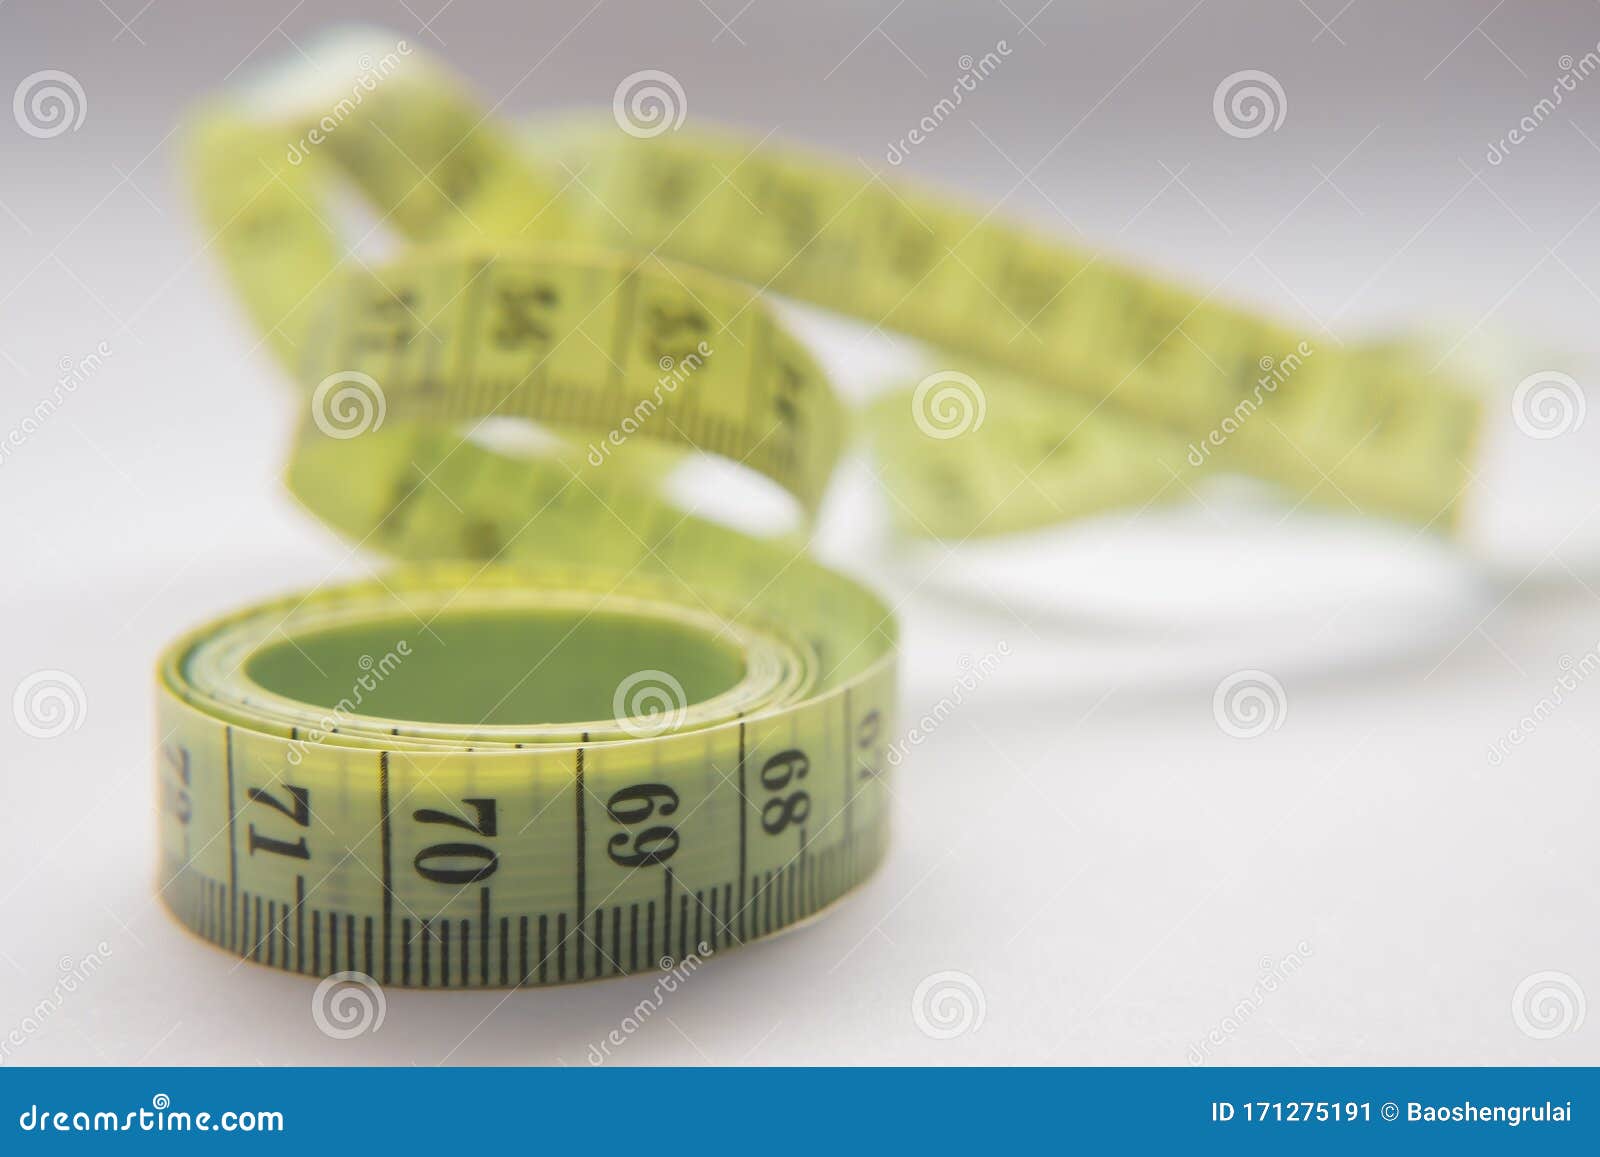 https://thumbs.dreamstime.com/z/close-up-tape-measure-soft-ruler-generally-used-measuring-body-circumference-cutting-clothes-s-very-171275191.jpg